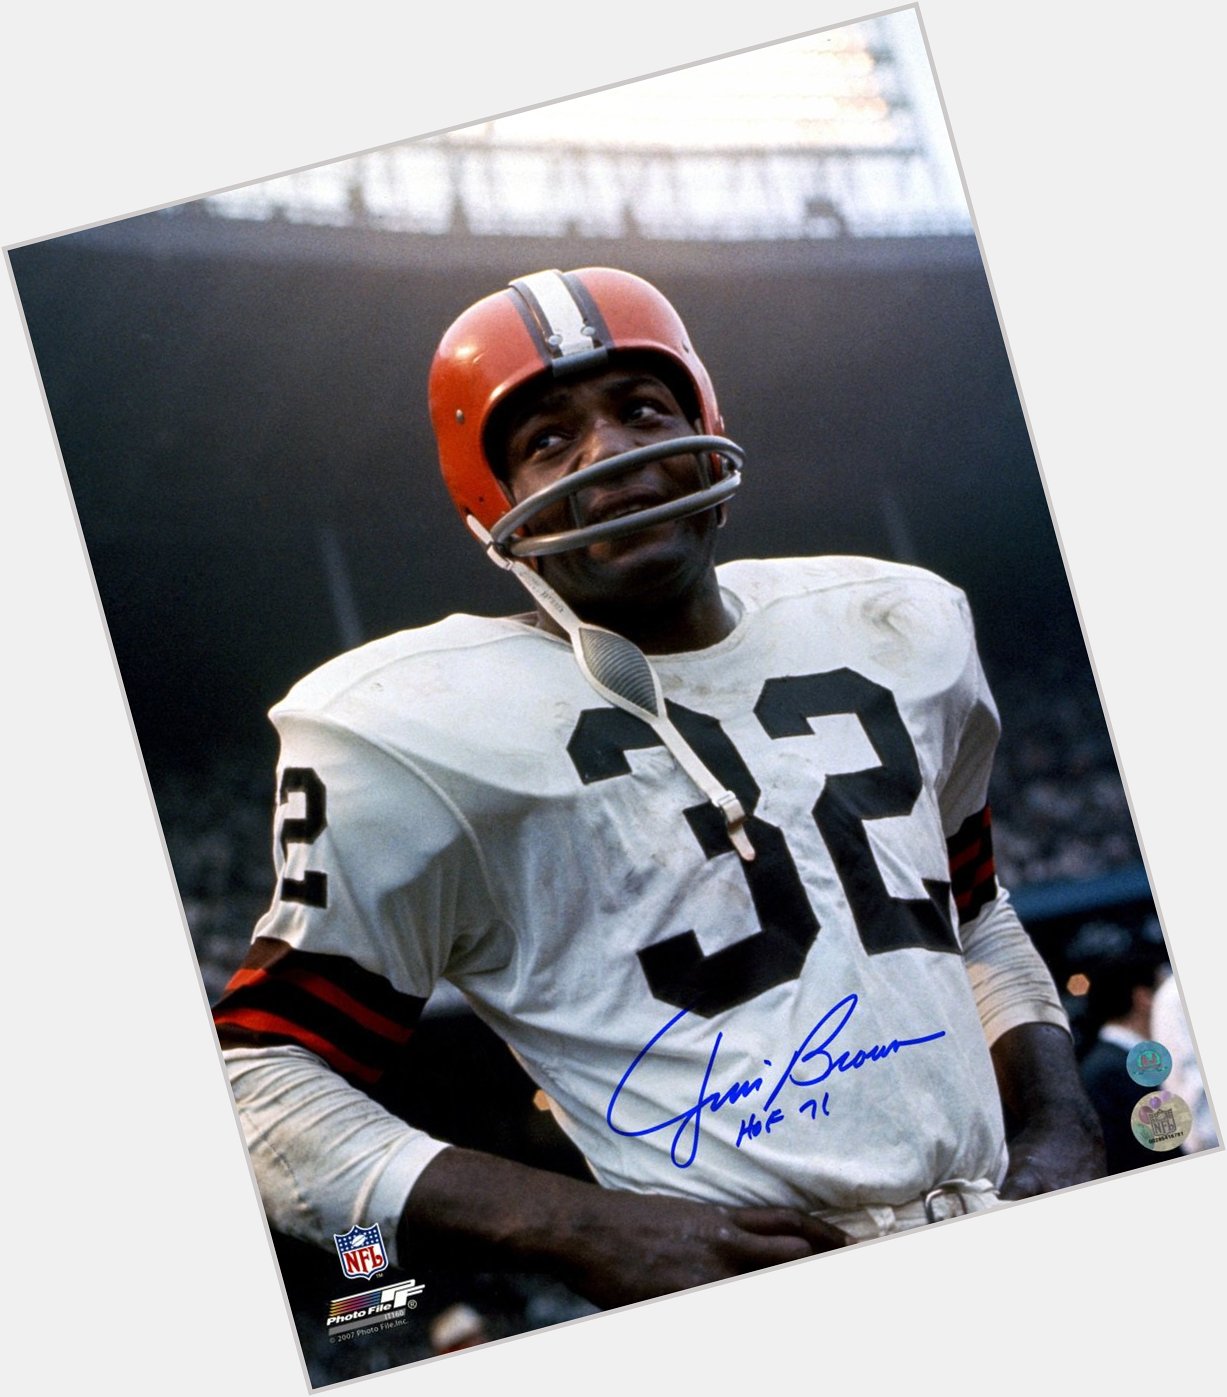 Happy 81st Birthday to the Legendary former Running Back Jim Brown! 